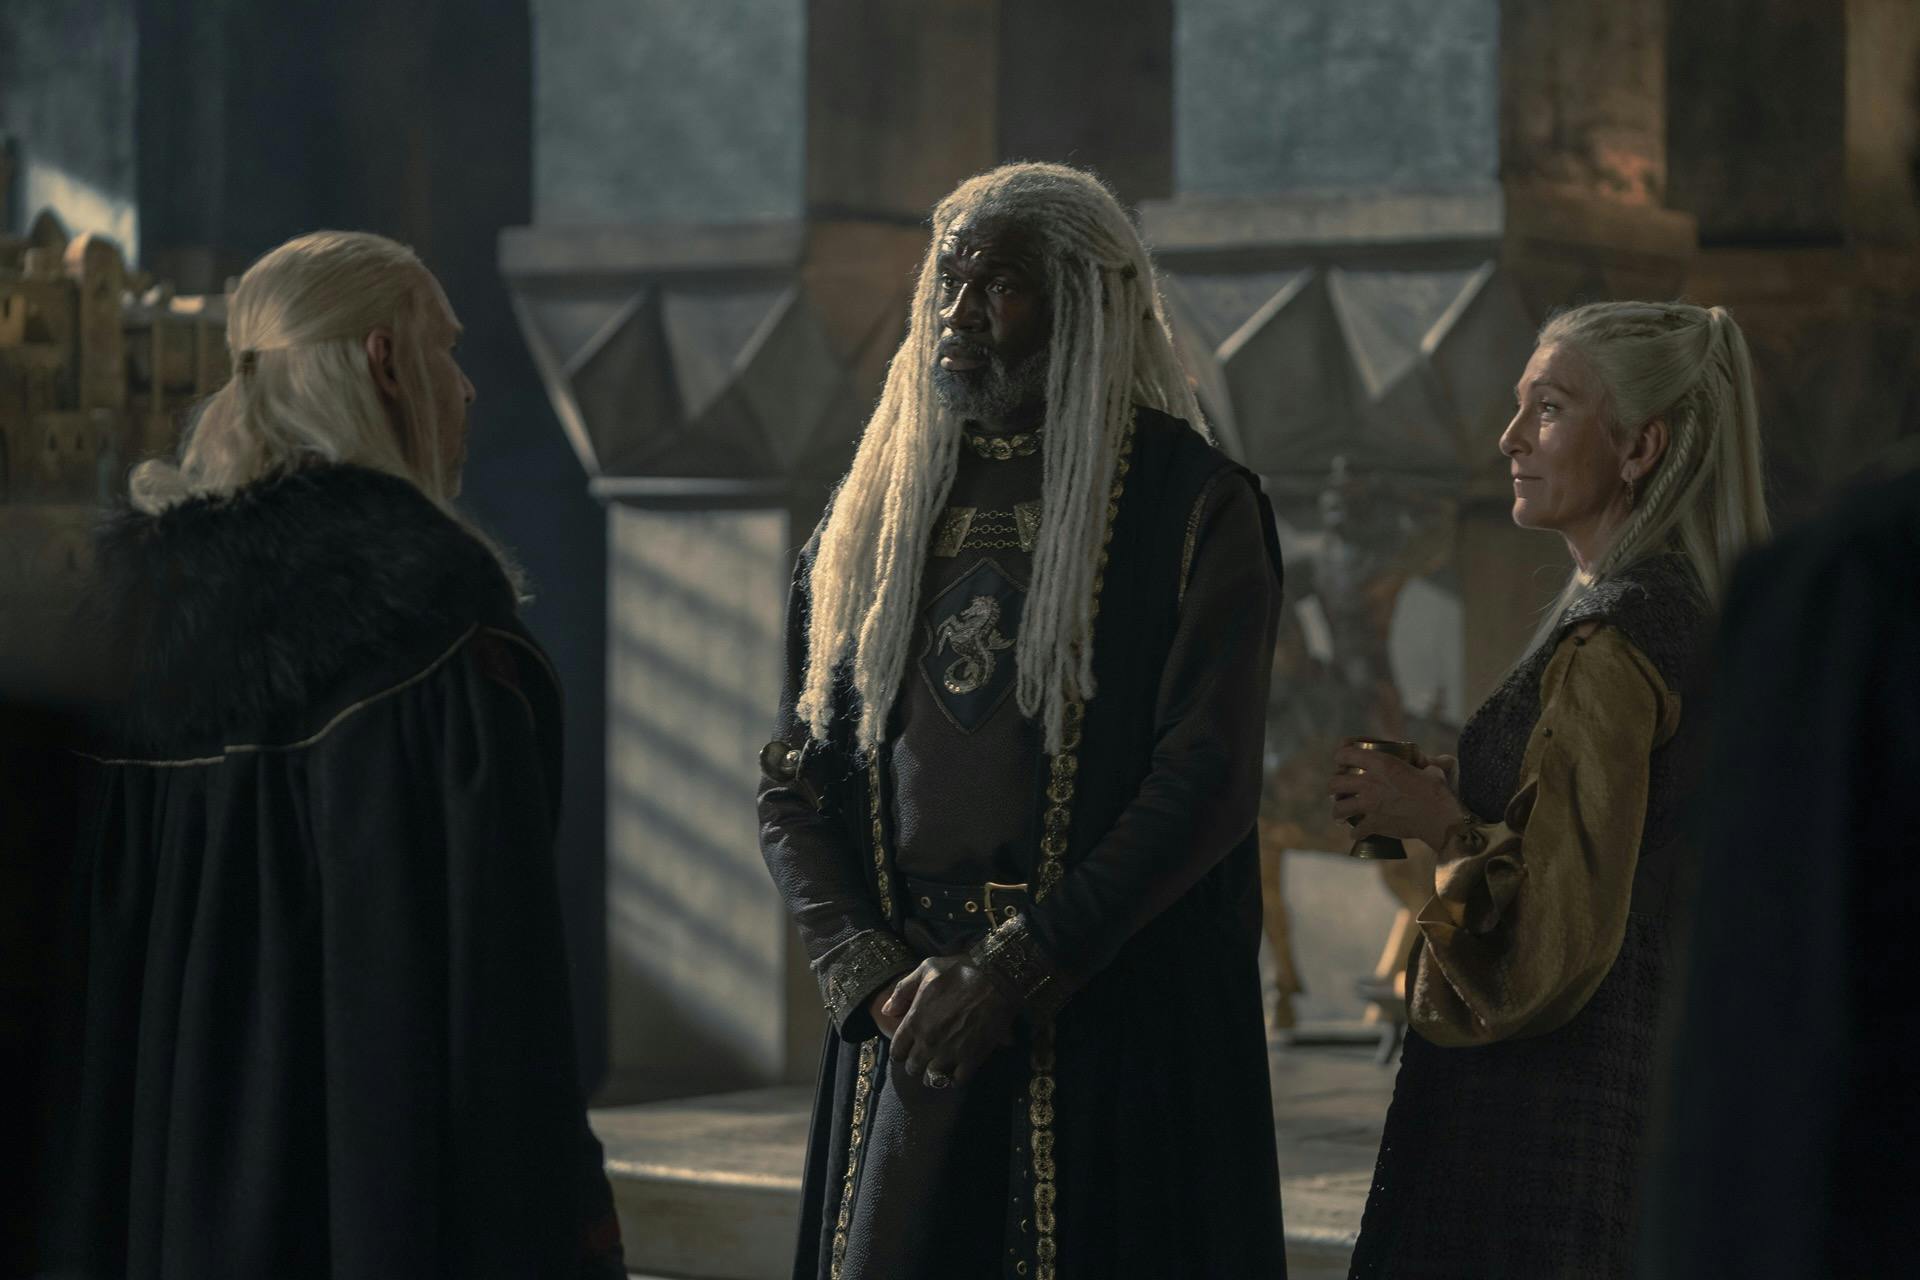 (l-r) viserys, corlys, and rhaenys in house of the dragon